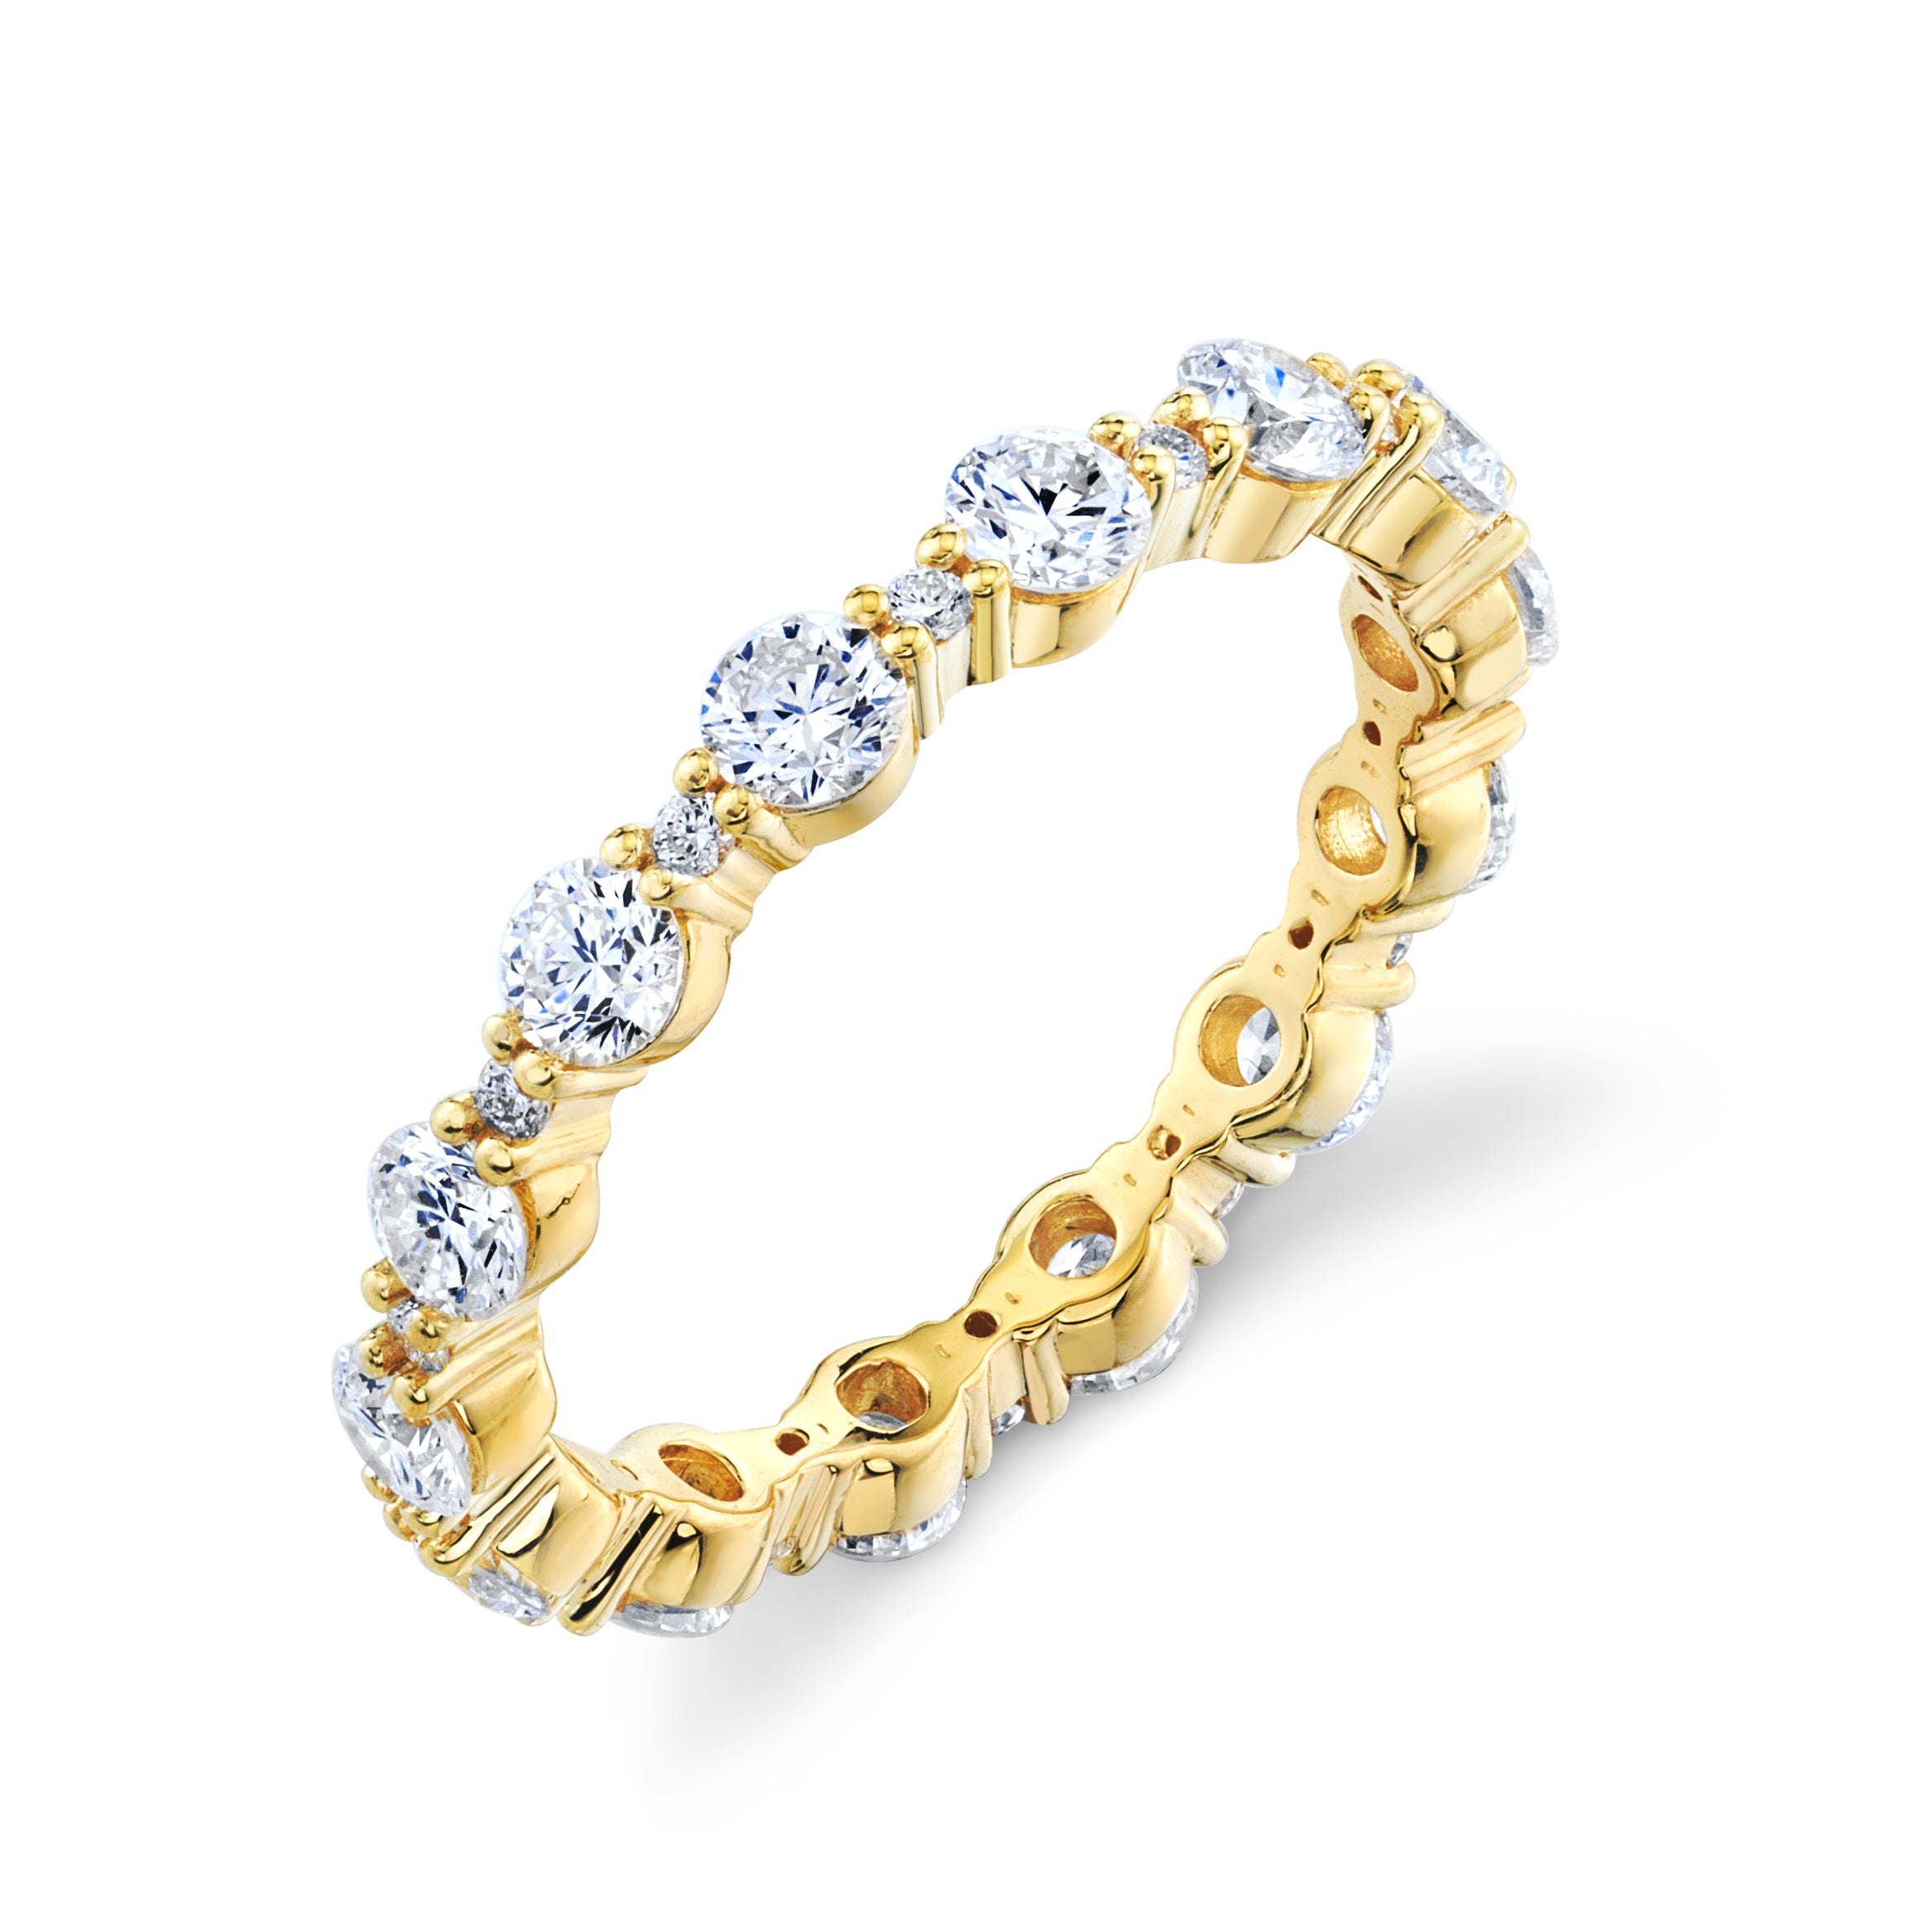 White Diamond Eternity Band With Prong Spacers